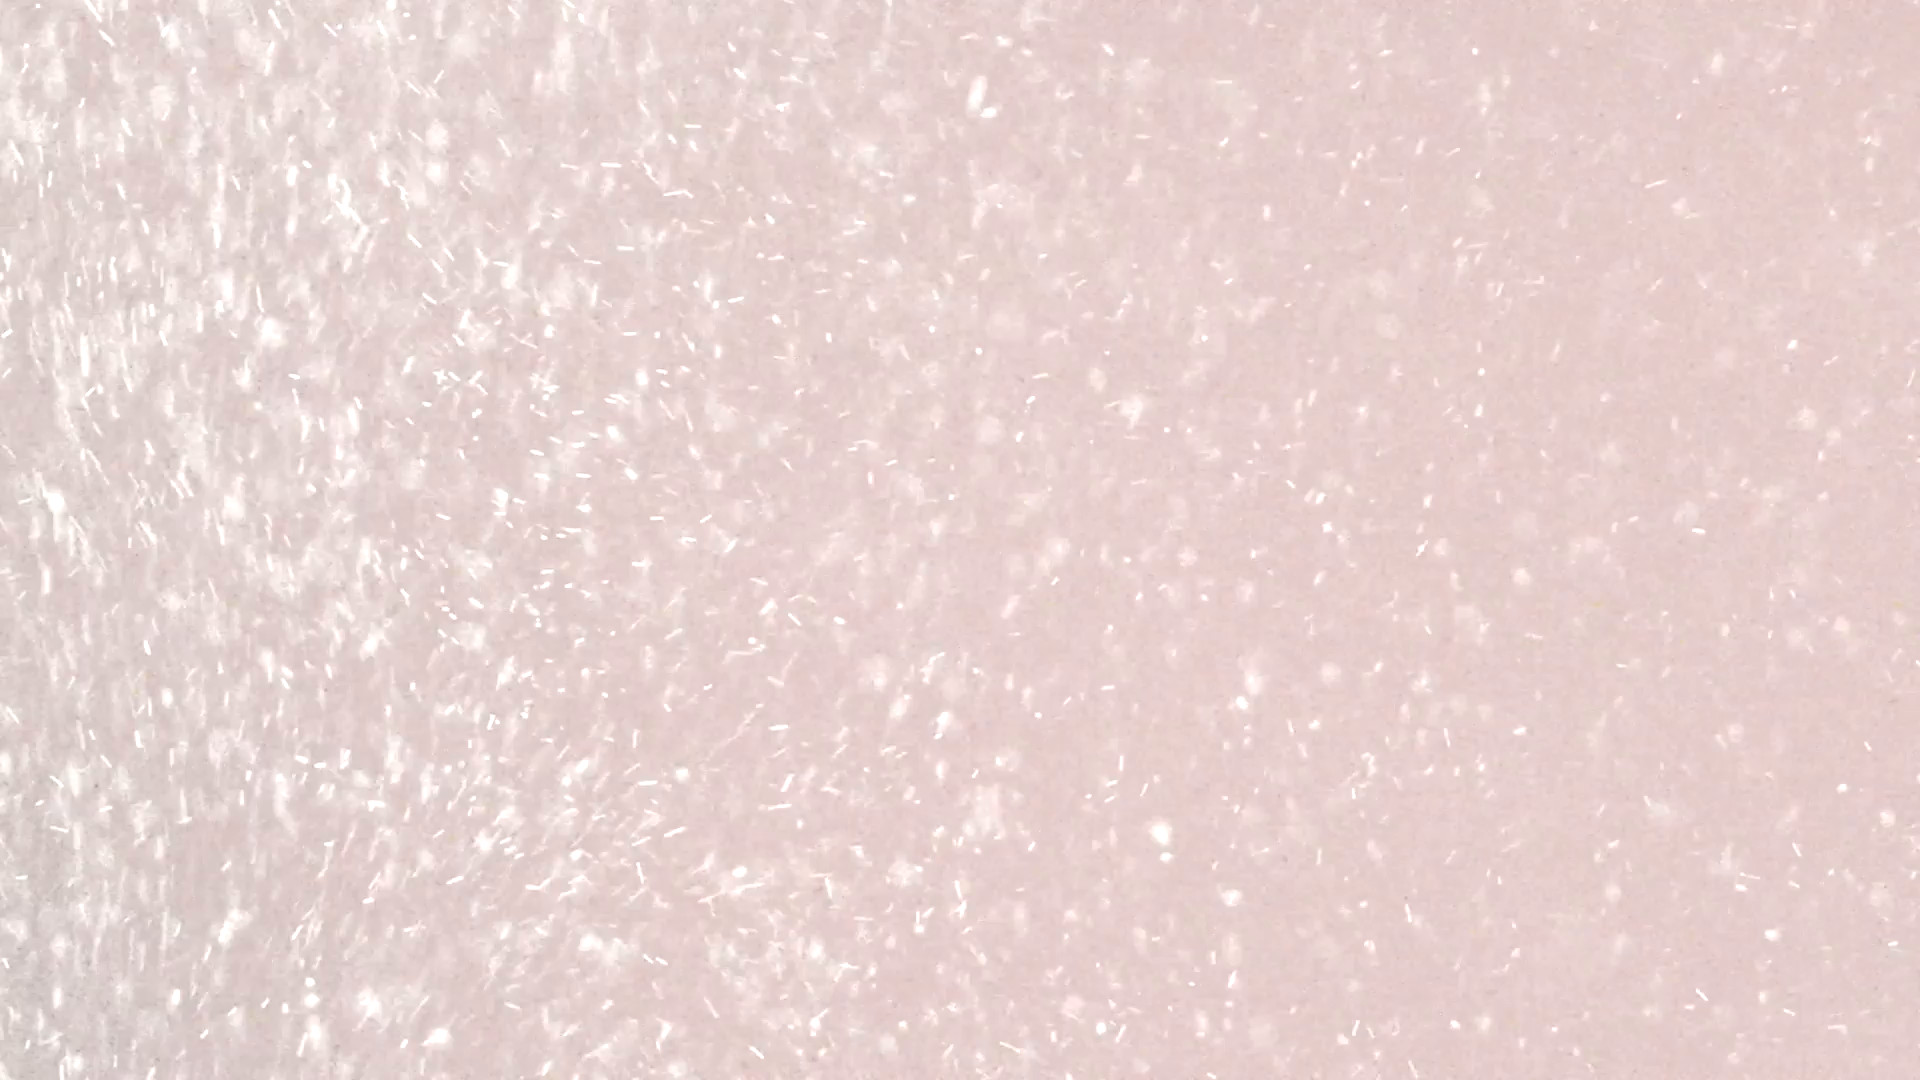 1920x1080 Flying particles 1 - floating snow, dust background - Soft, fairytale  snowflakes Motion Background - VideoBlocks